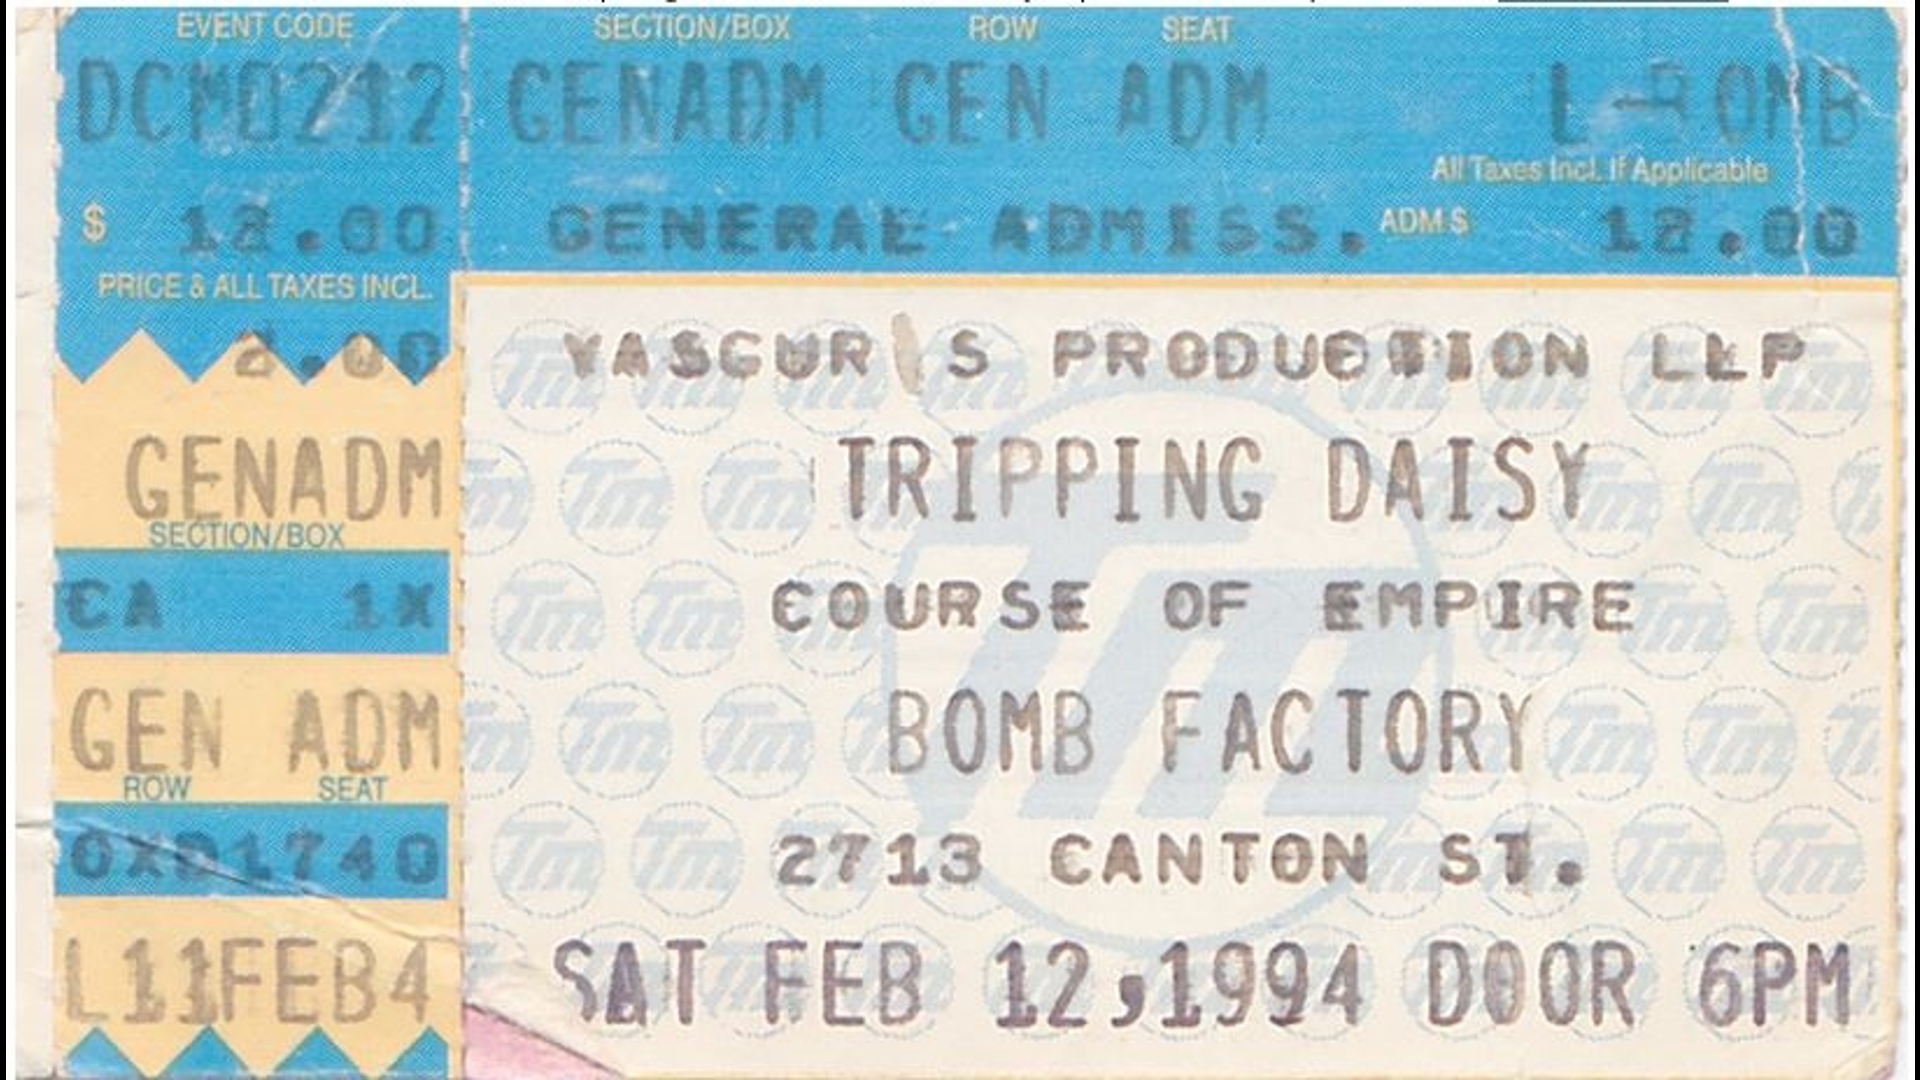 Dallas 90s band performs at The Factory in Deep Ellum on Feb. 12, 1994.